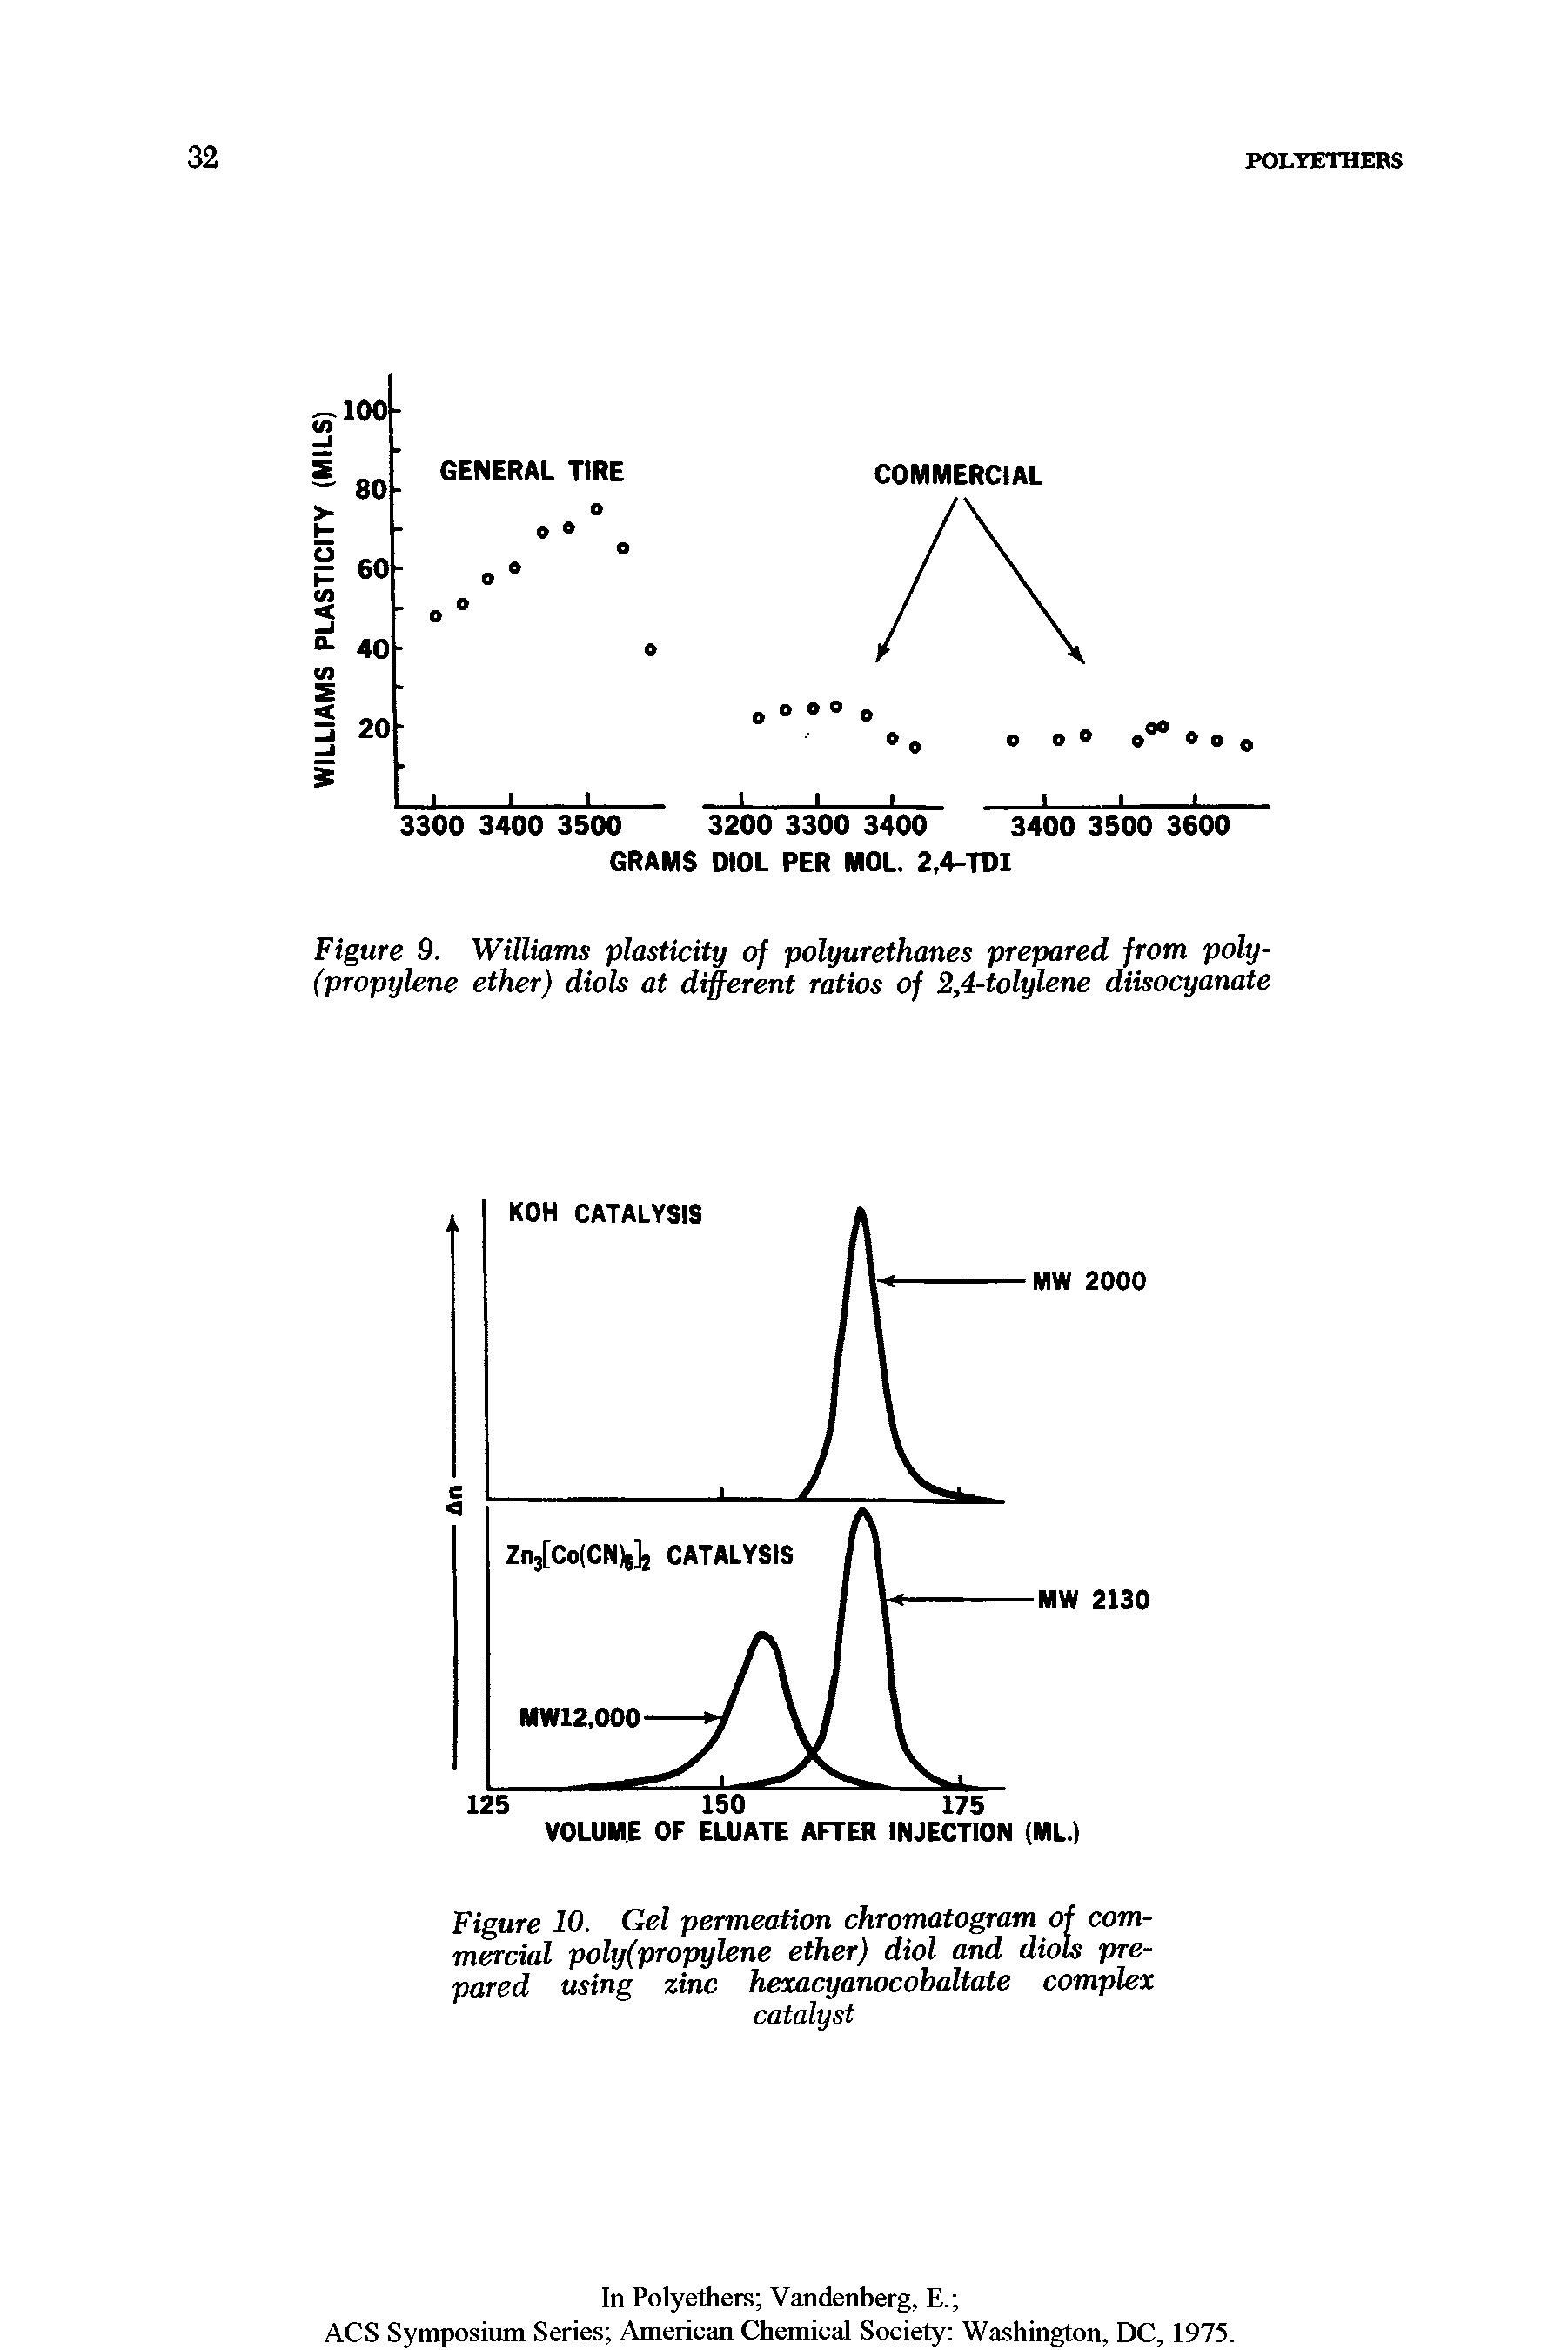 Figure 9. Williams plasticity of polyurethanes prepared from poly-(propylene ether) diols at d erent ratios of 2,4-tolylene diisocyanate...